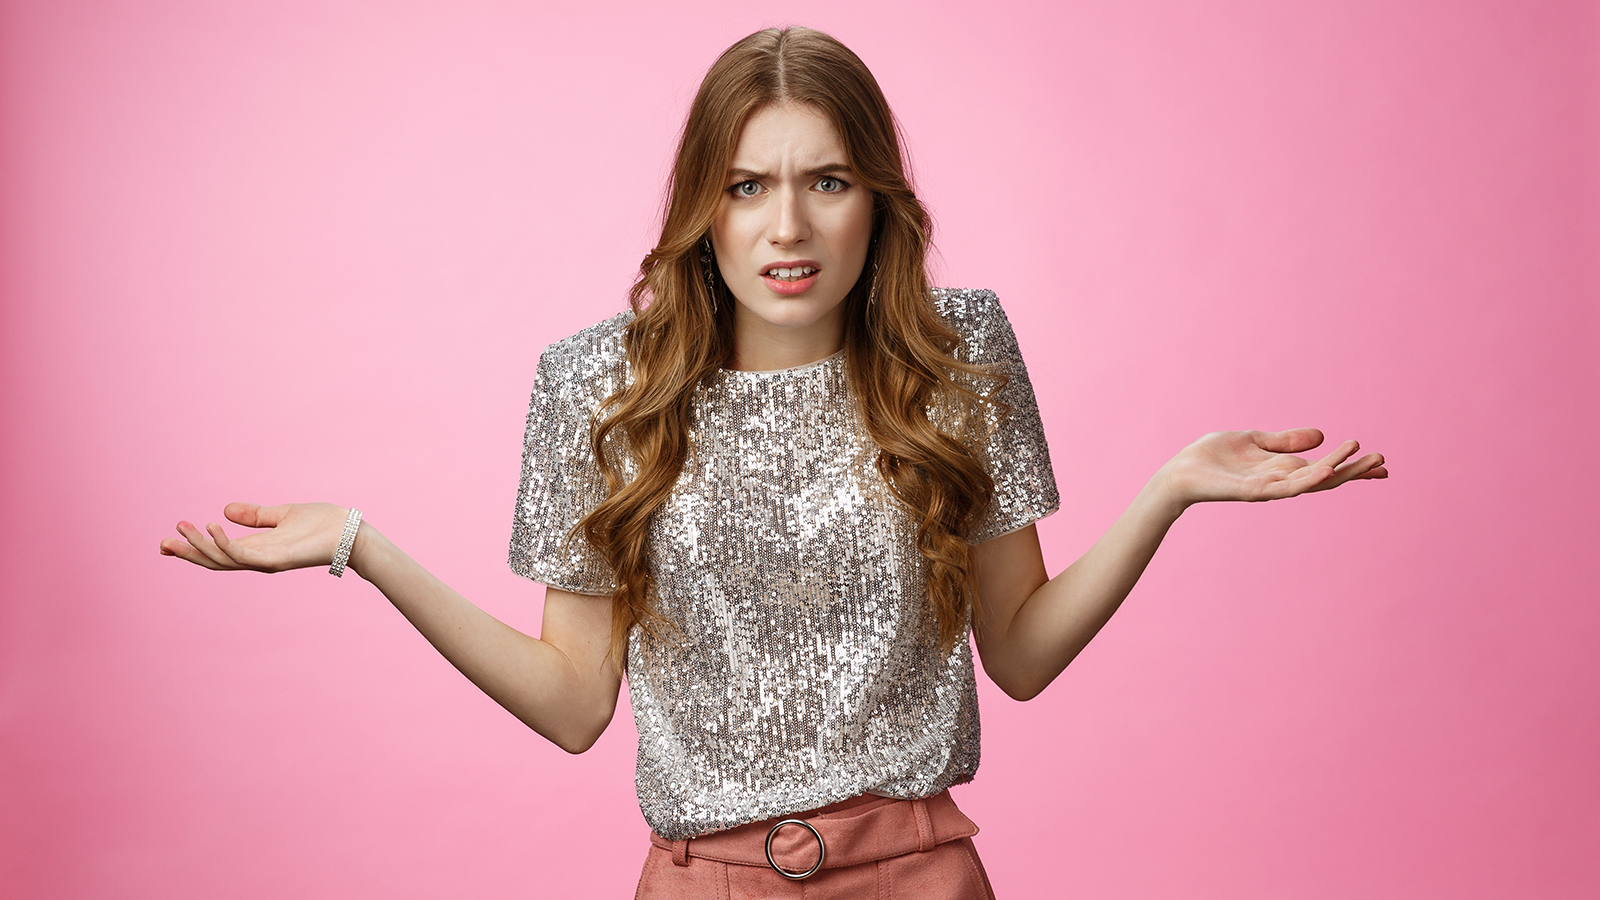 Pissed off annoyed glamour arrogant european woman arguing shrugging cringing displeased bothered spread hands sideways dismay, fighting confused questioned irritated, standing pink background